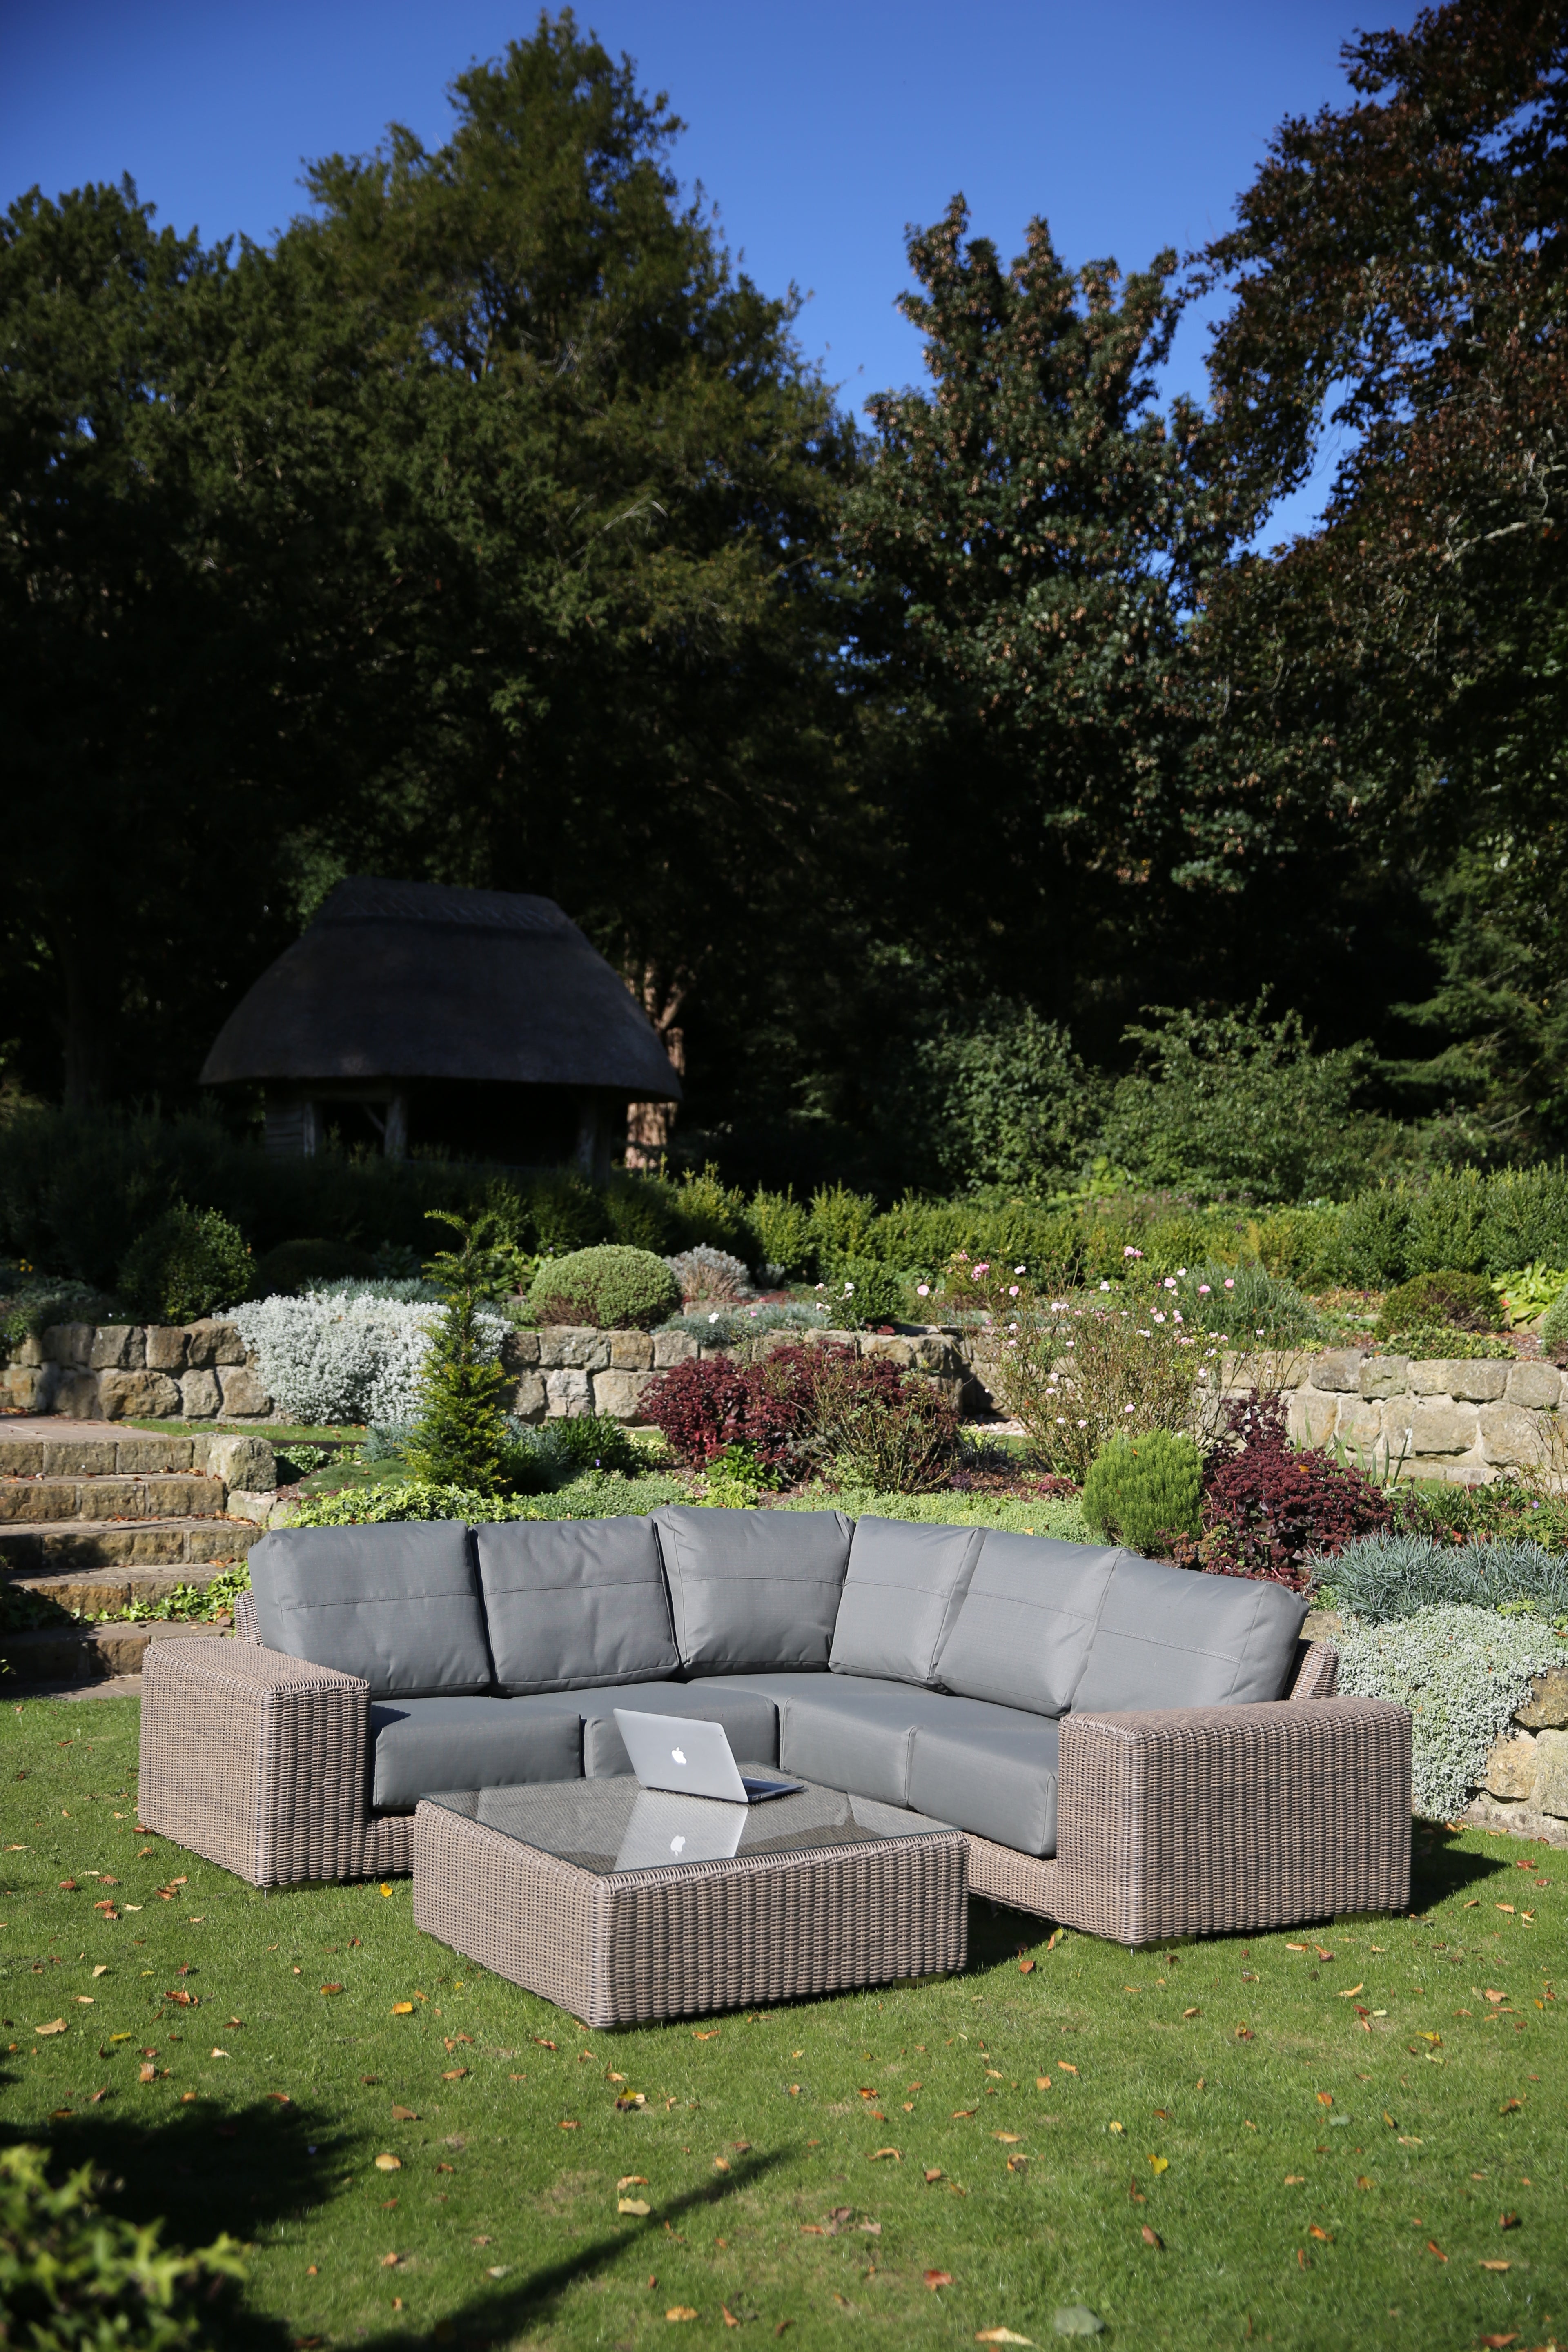 4 Seasons Outdoor Kingston Modular 2 Seater Left With 4 Cushions